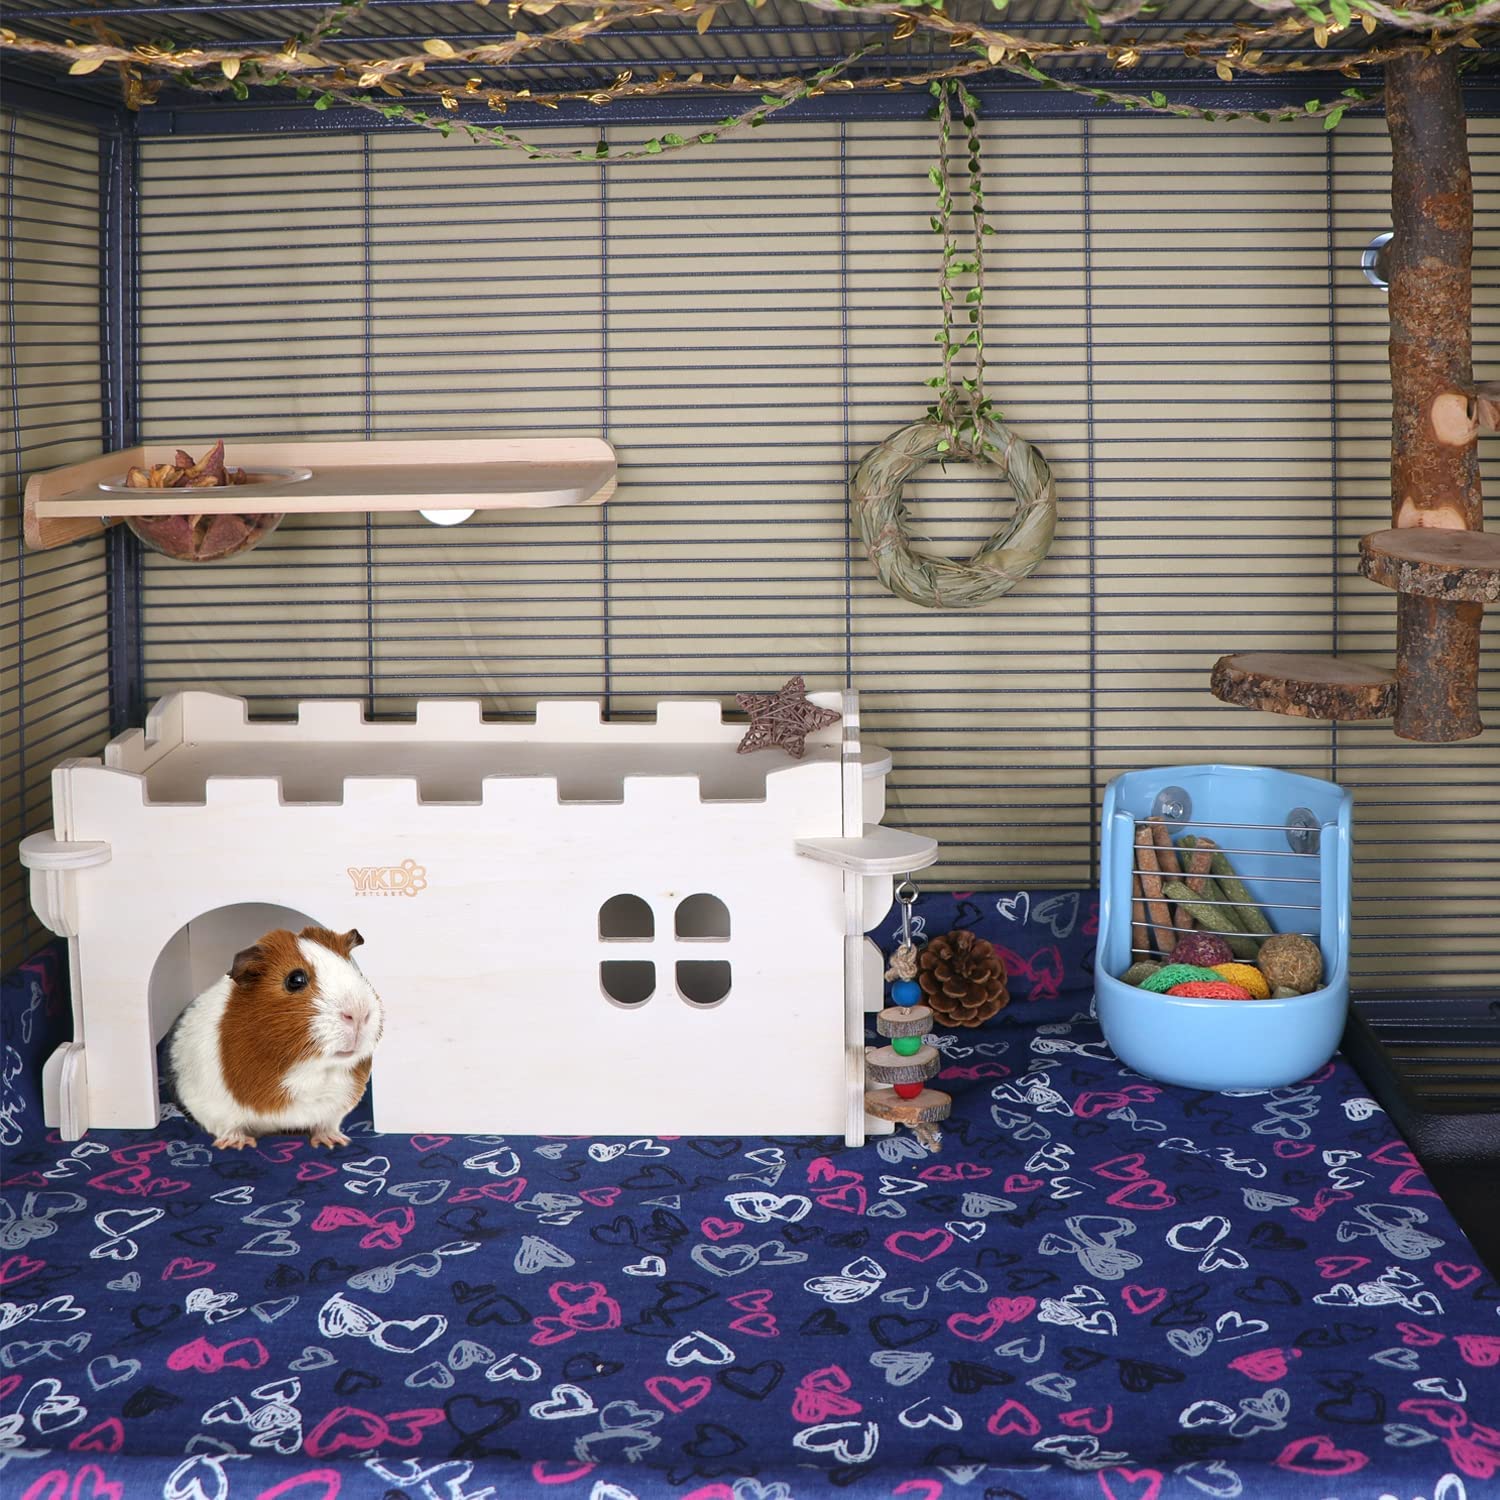 Huts for Guinea Pigs